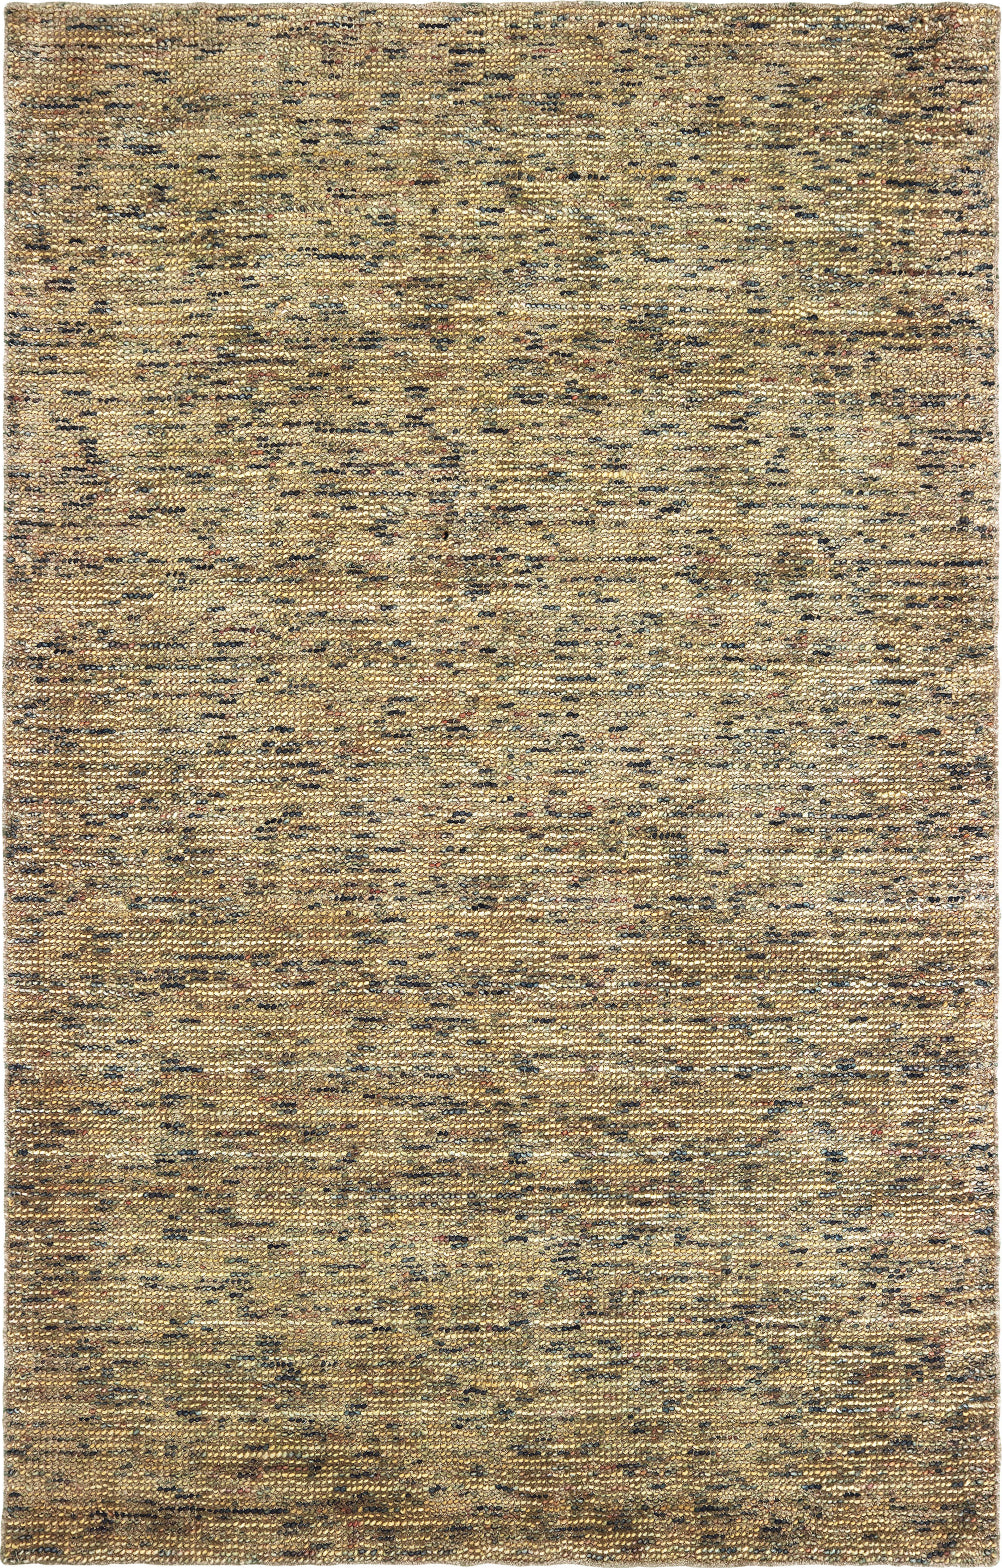 Tommy Bahama Lucent 45906 Gold Green Area Rug main image